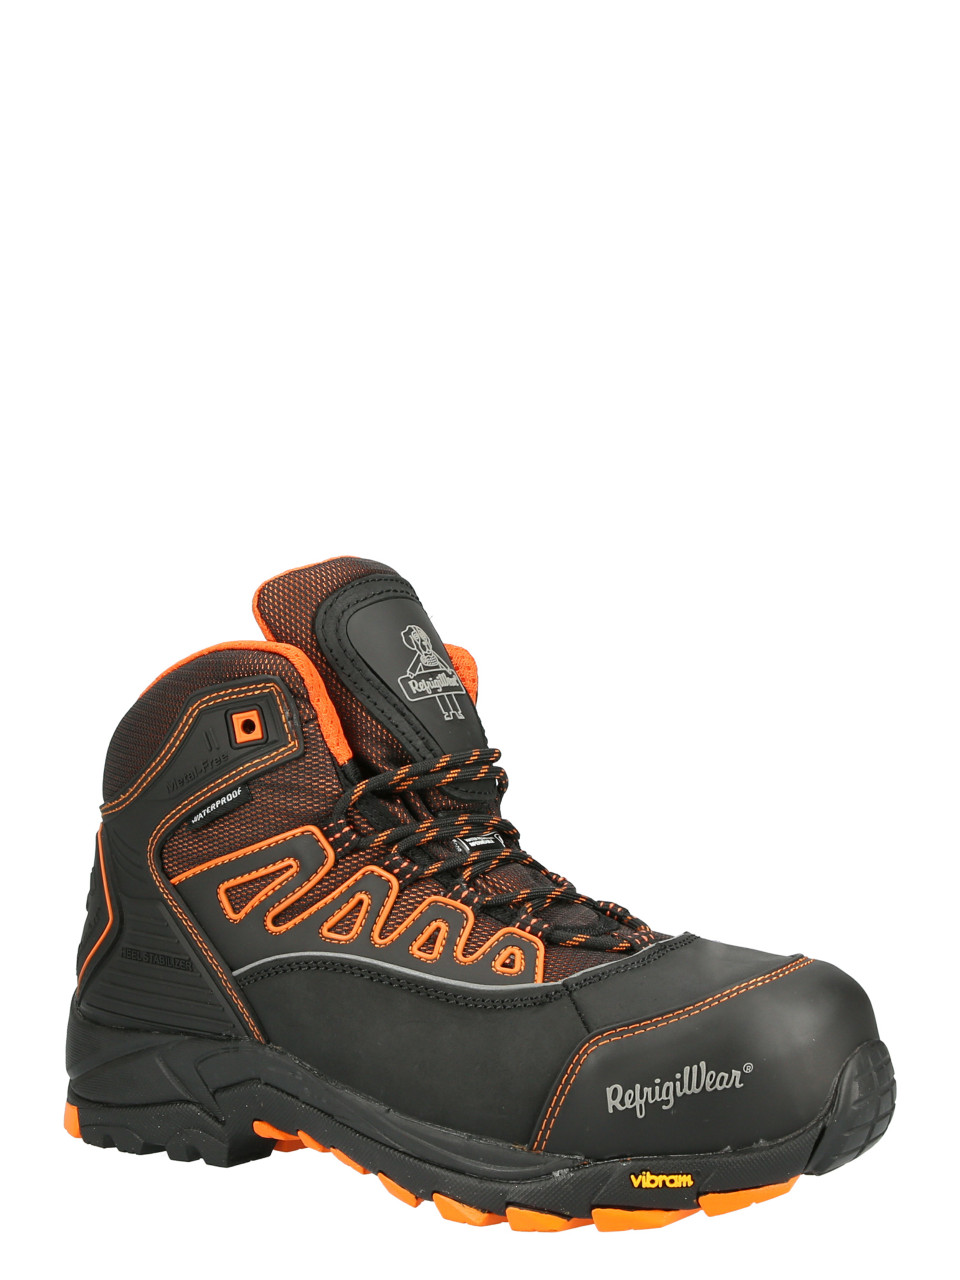 Women’s PolarForce® Hiker Boot (1340) | Rated for -30°F | RefrigiWear